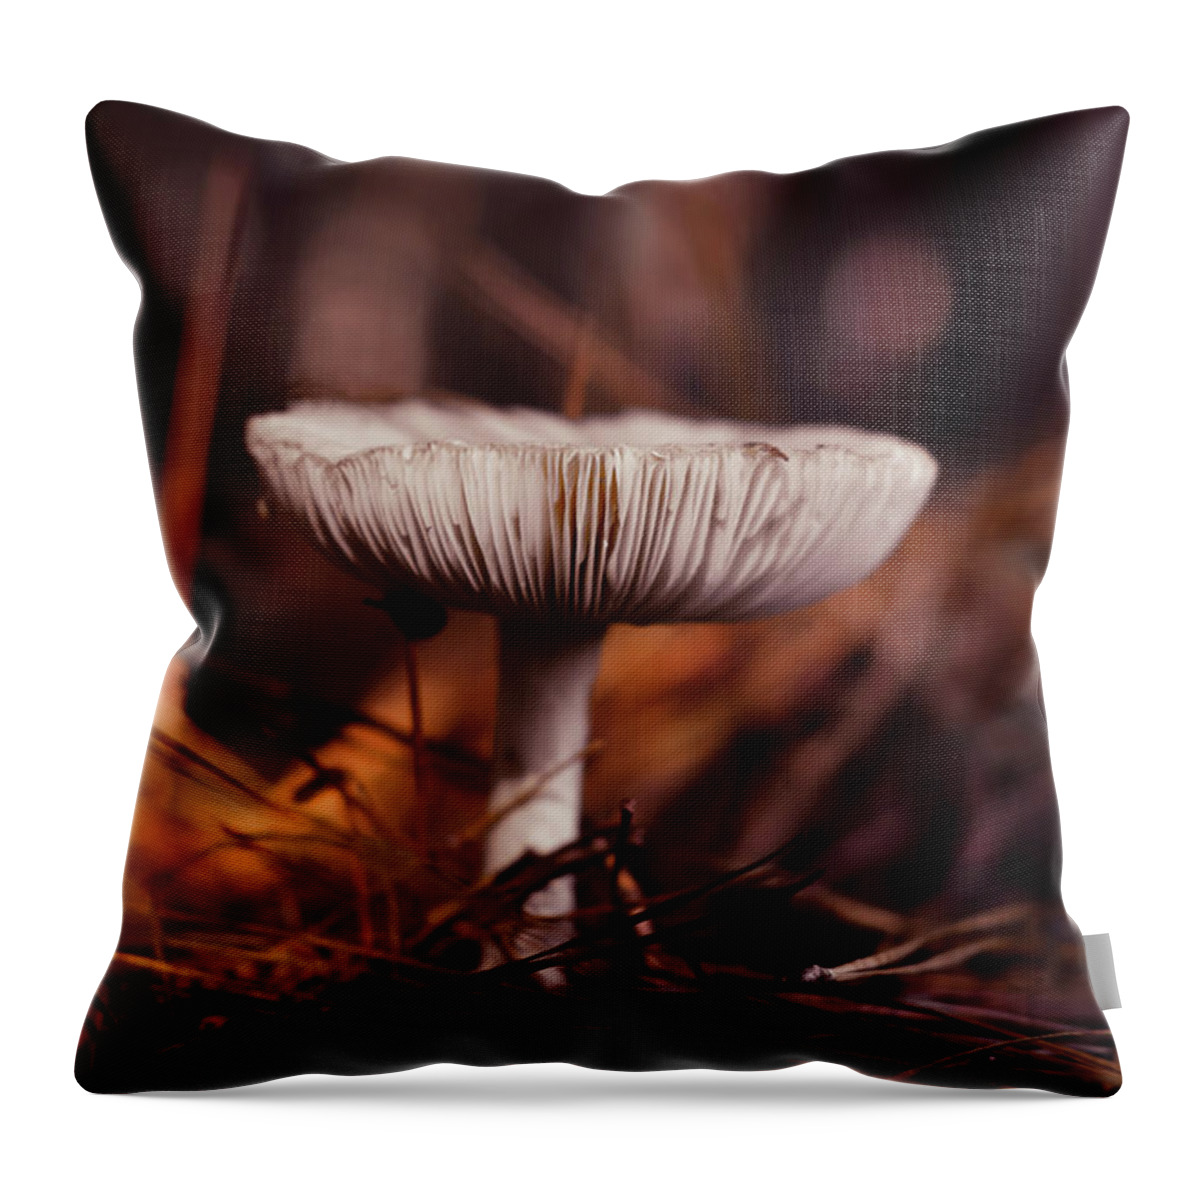 Mushroom Throw Pillow featuring the photograph Shroom - Macro by Adrian De Leon Art and Photography